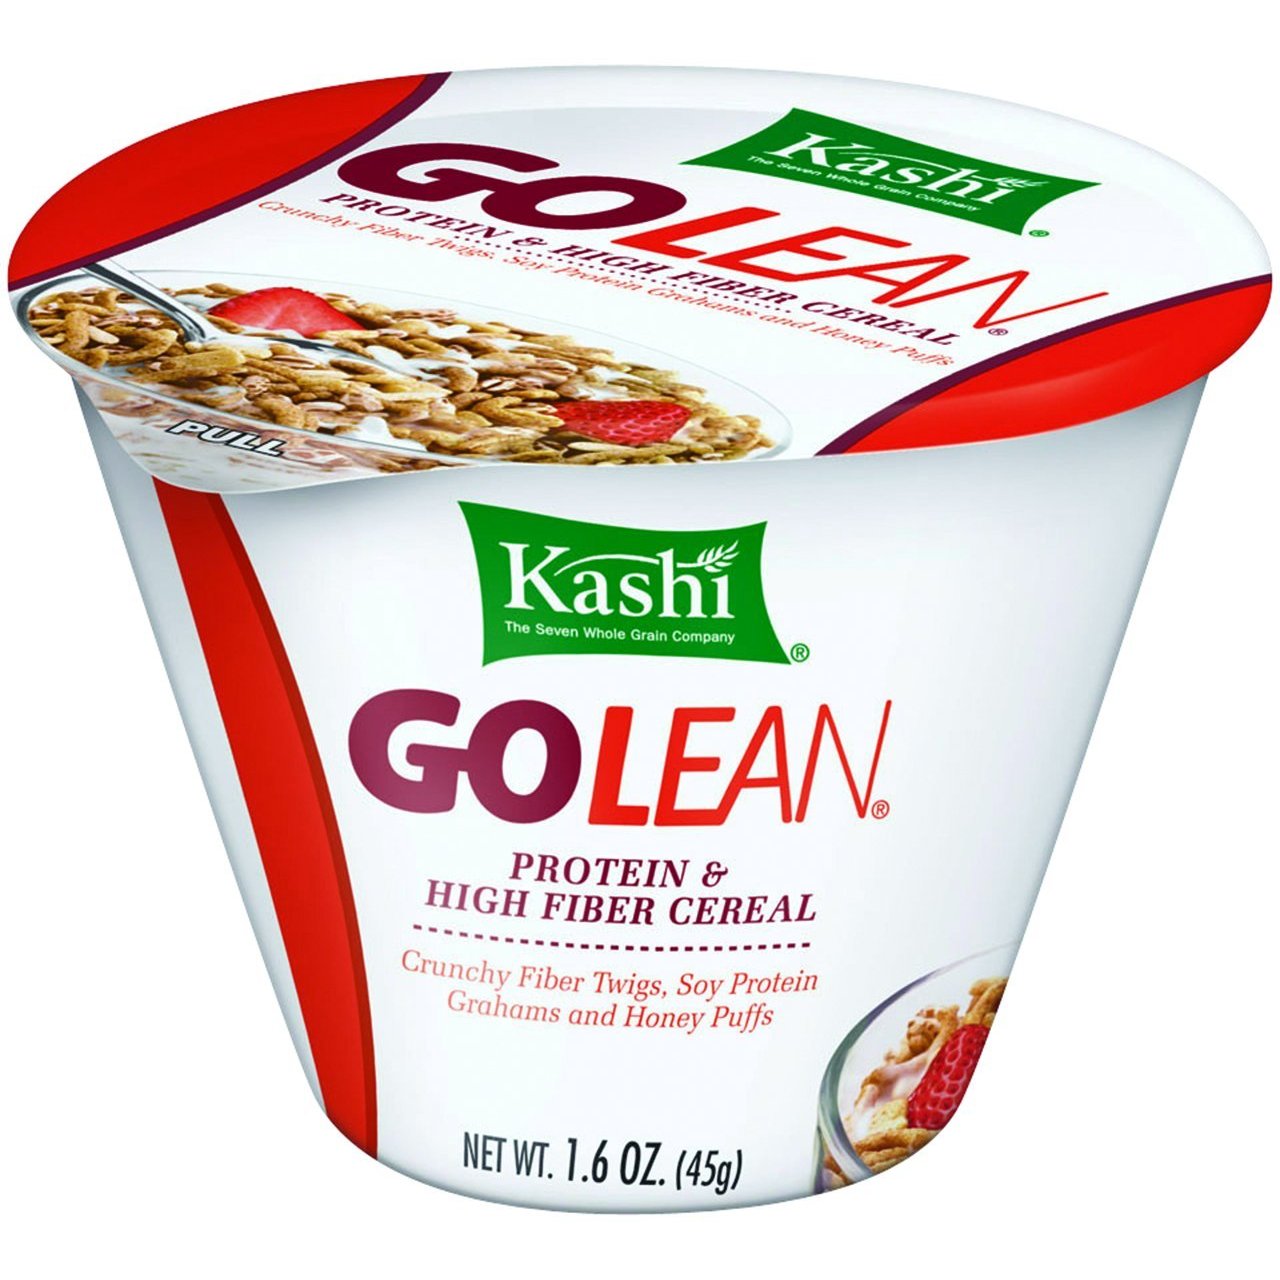 Extreme Couponing Mommy: FREE Kashi To Go Cups with Printable Coupons